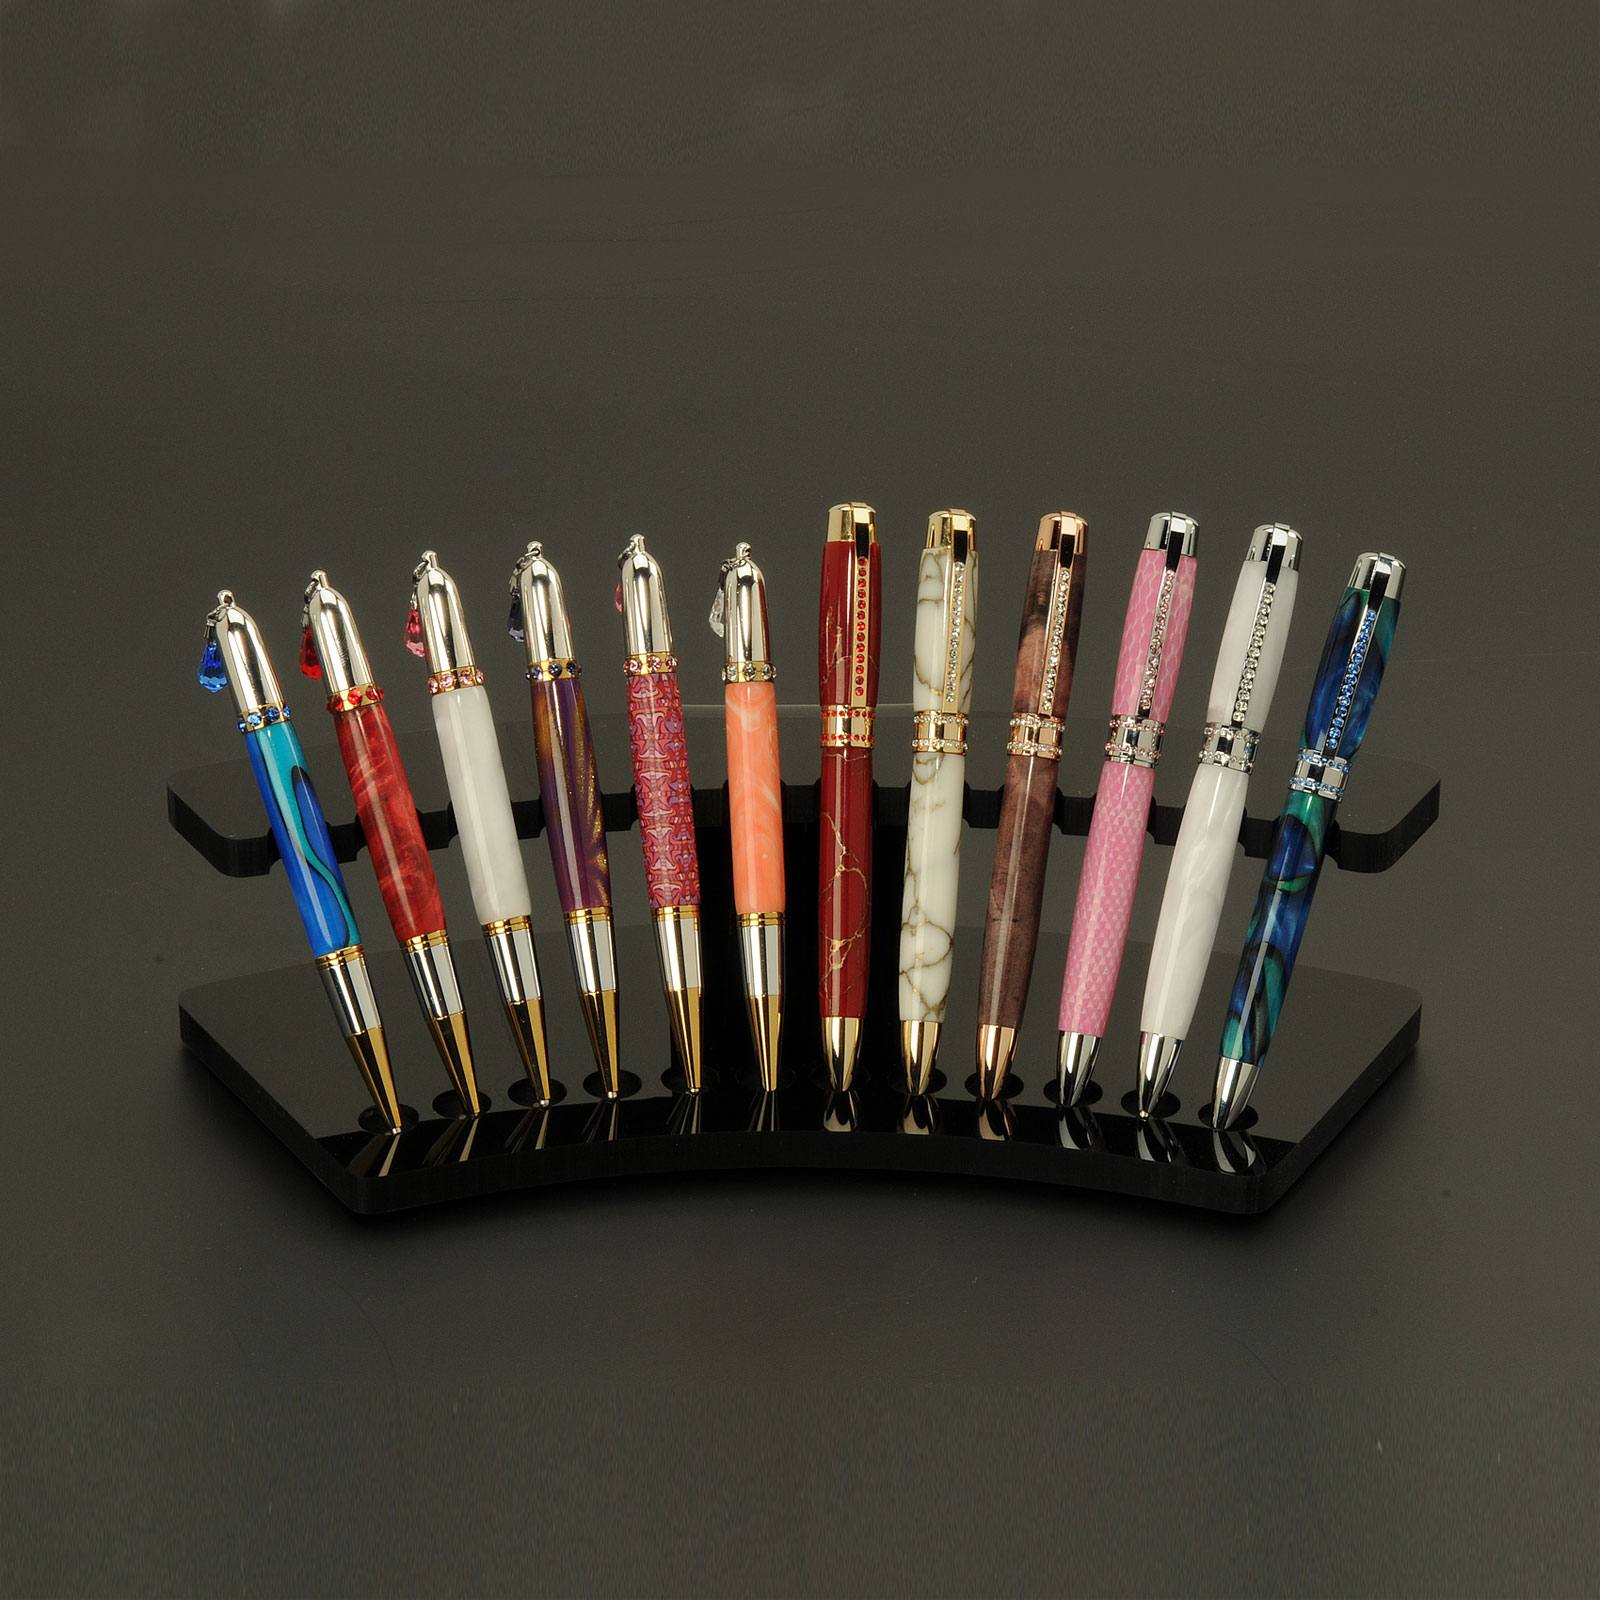 *1 Premium 8 Pen Display Holder Easel Stand for Fountain Pens Pencils 